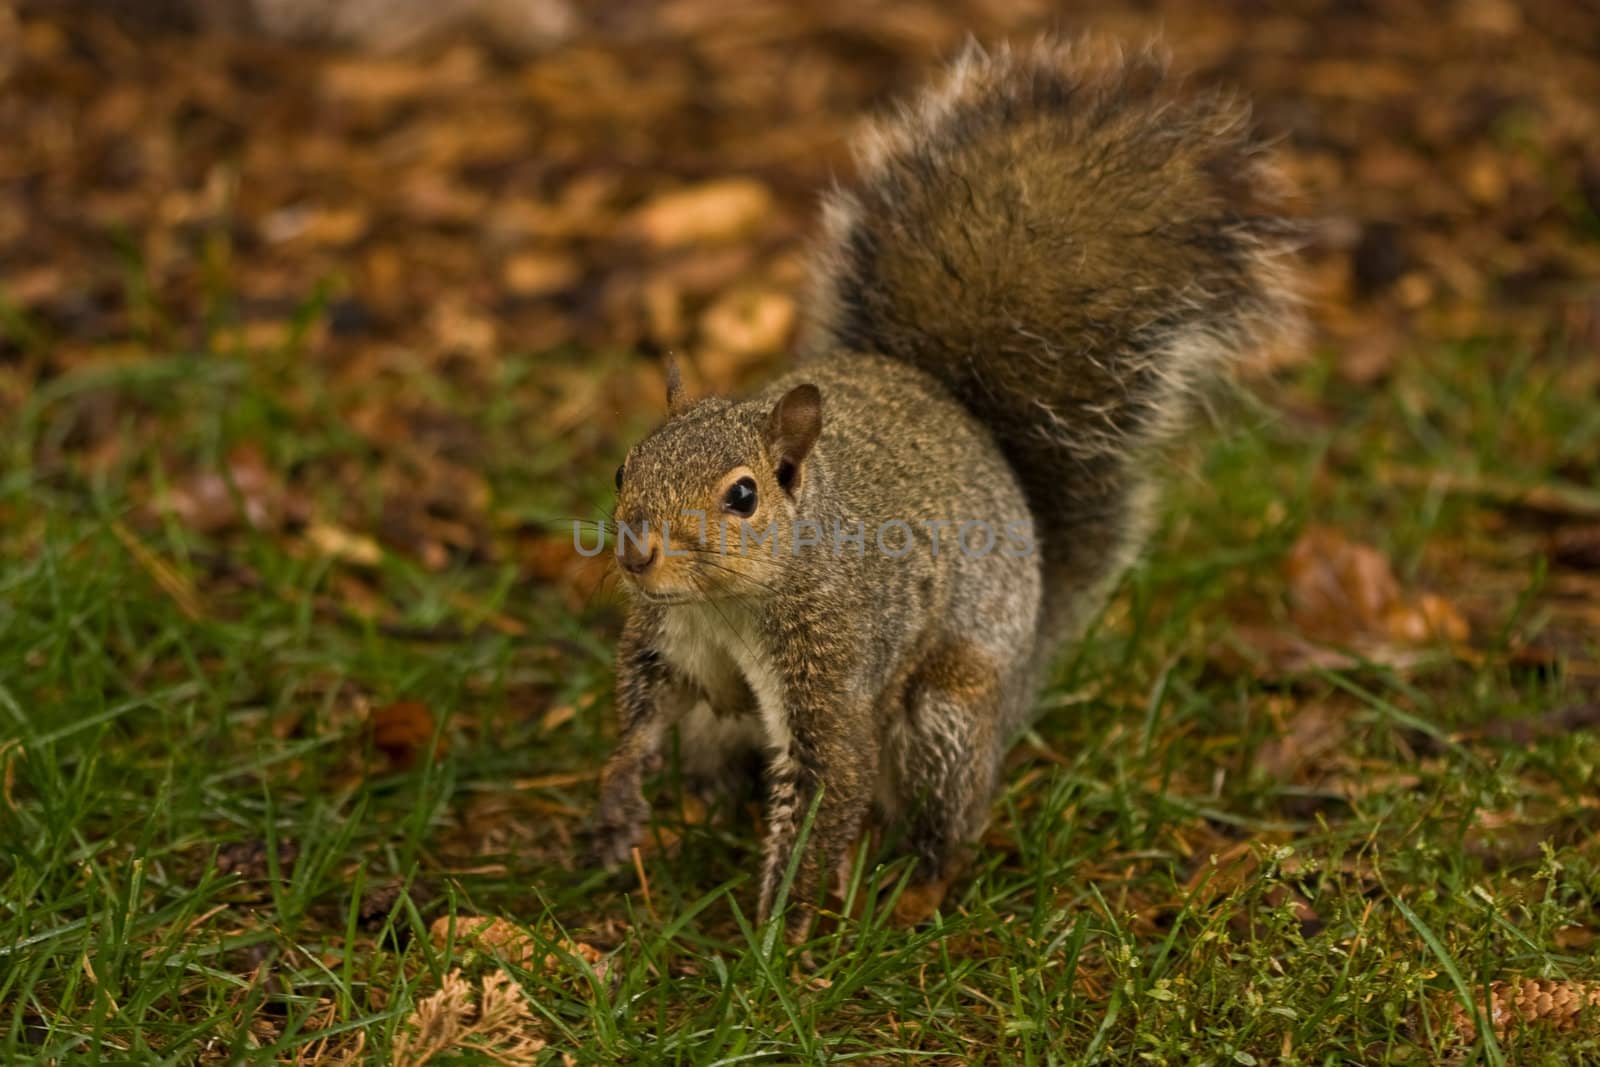 Photo of a cute squirrel taken at a park near my house.